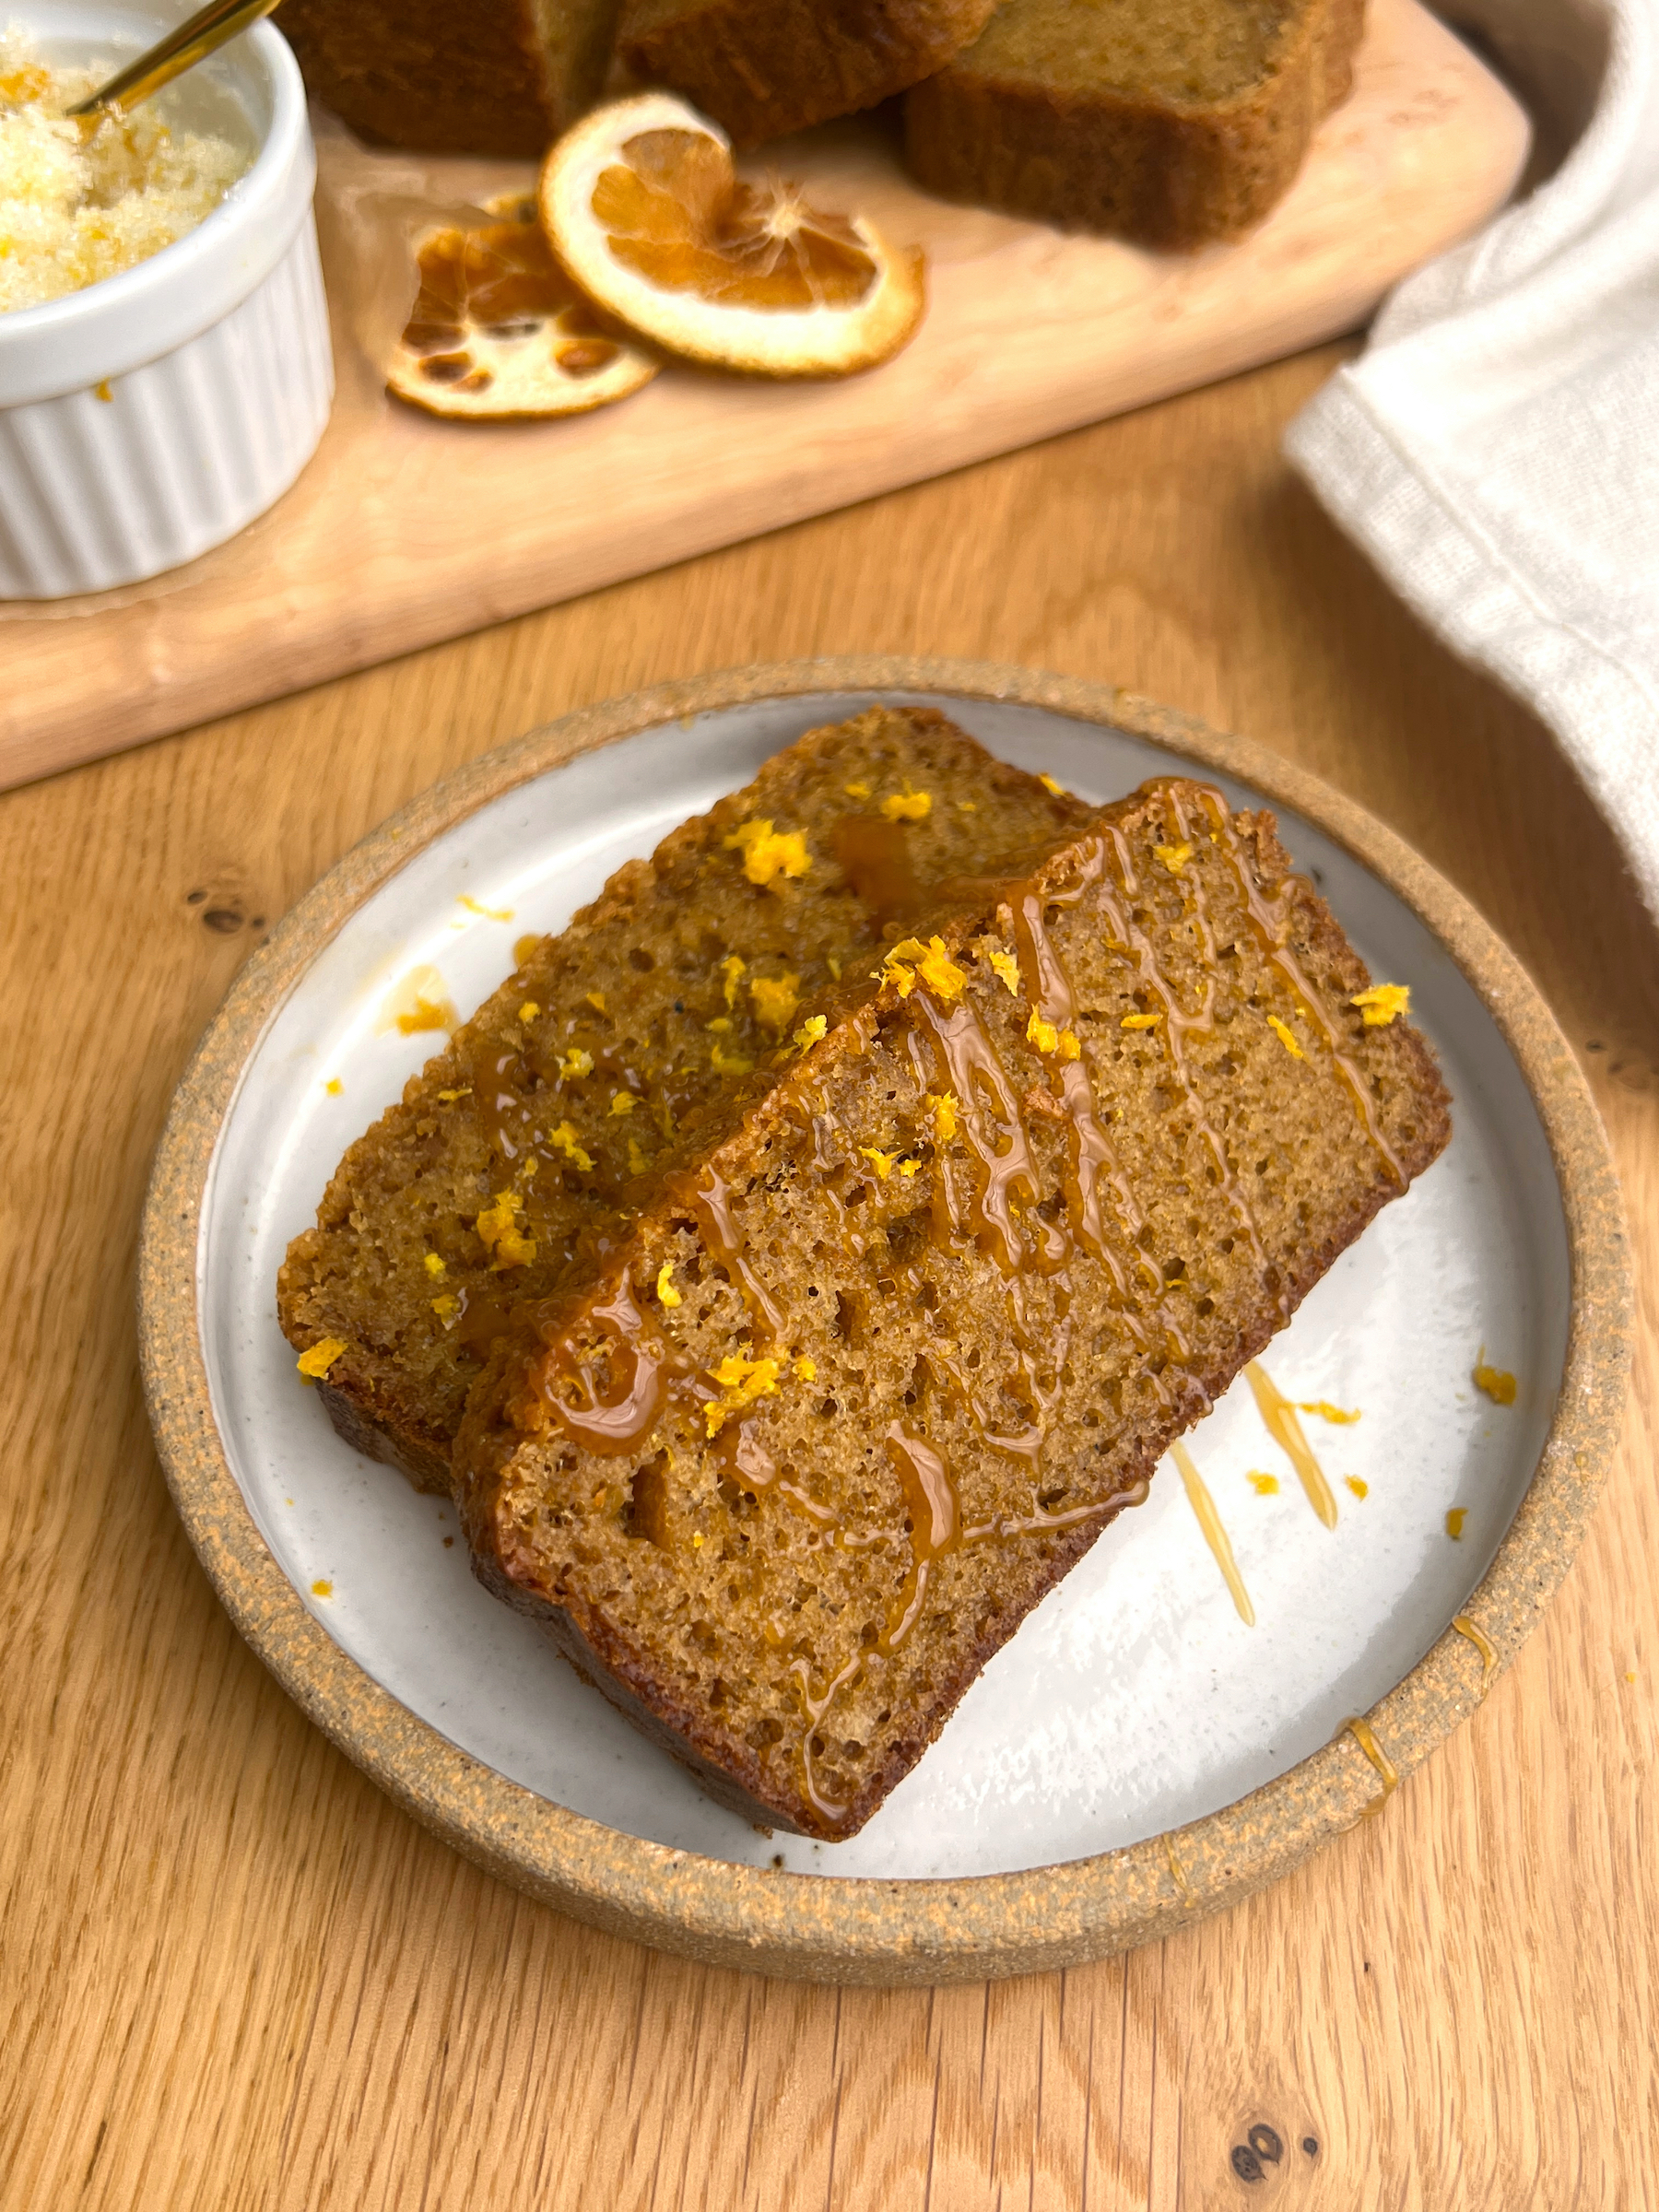 Two Slices of Paleo Almond Orange Loaf on White Plate with Decor in the Background